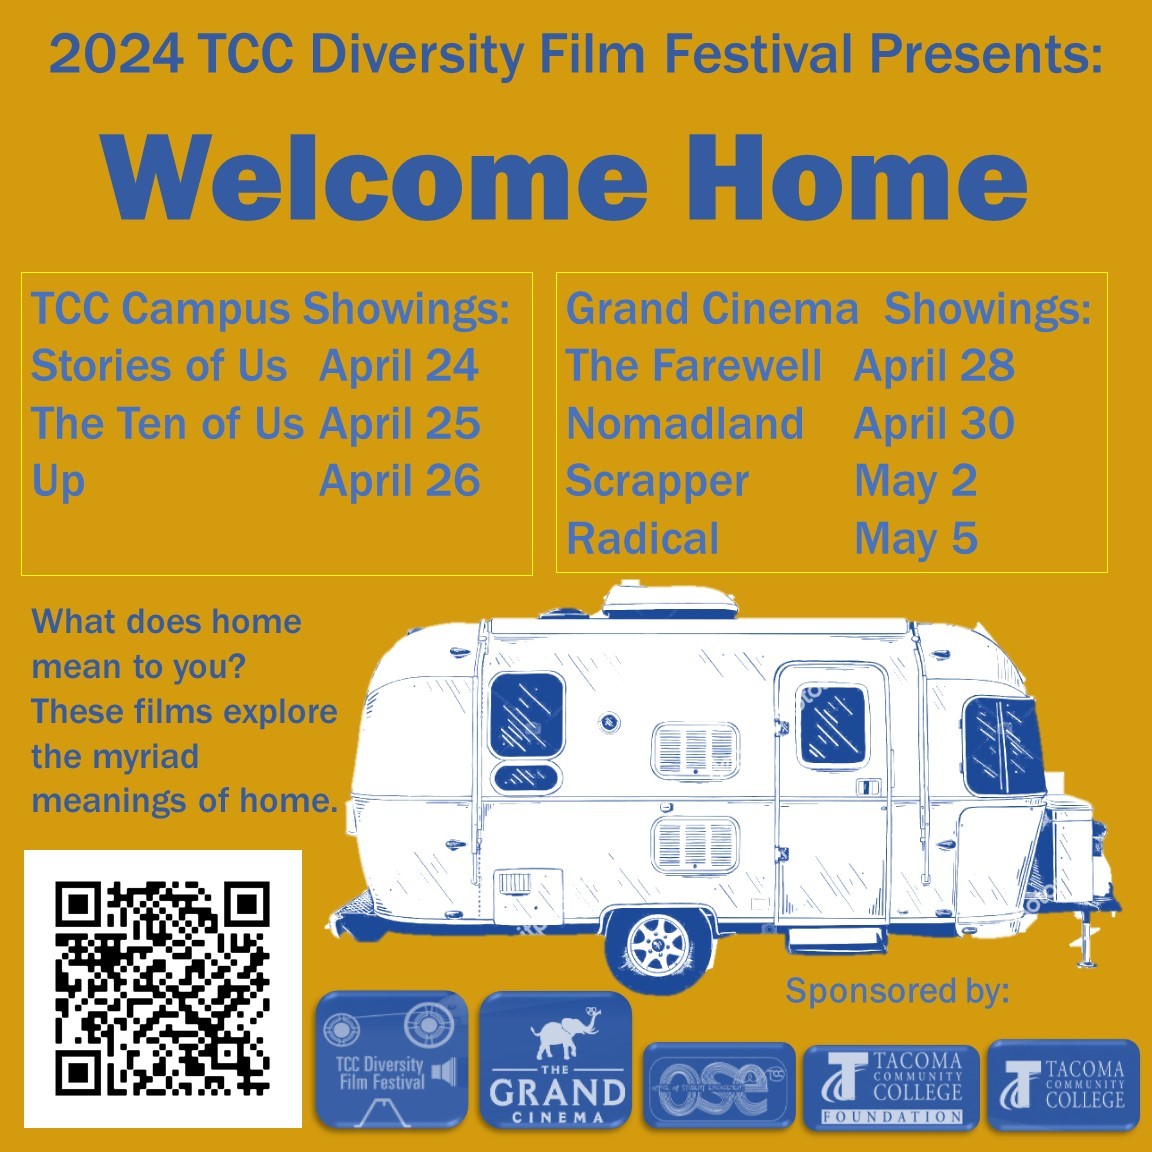 flyer for 2024 Diversity Film Festival, "Welcome Home," with a picture of a trailer, film titles and dates, and a QR code that directs to the film festival web page